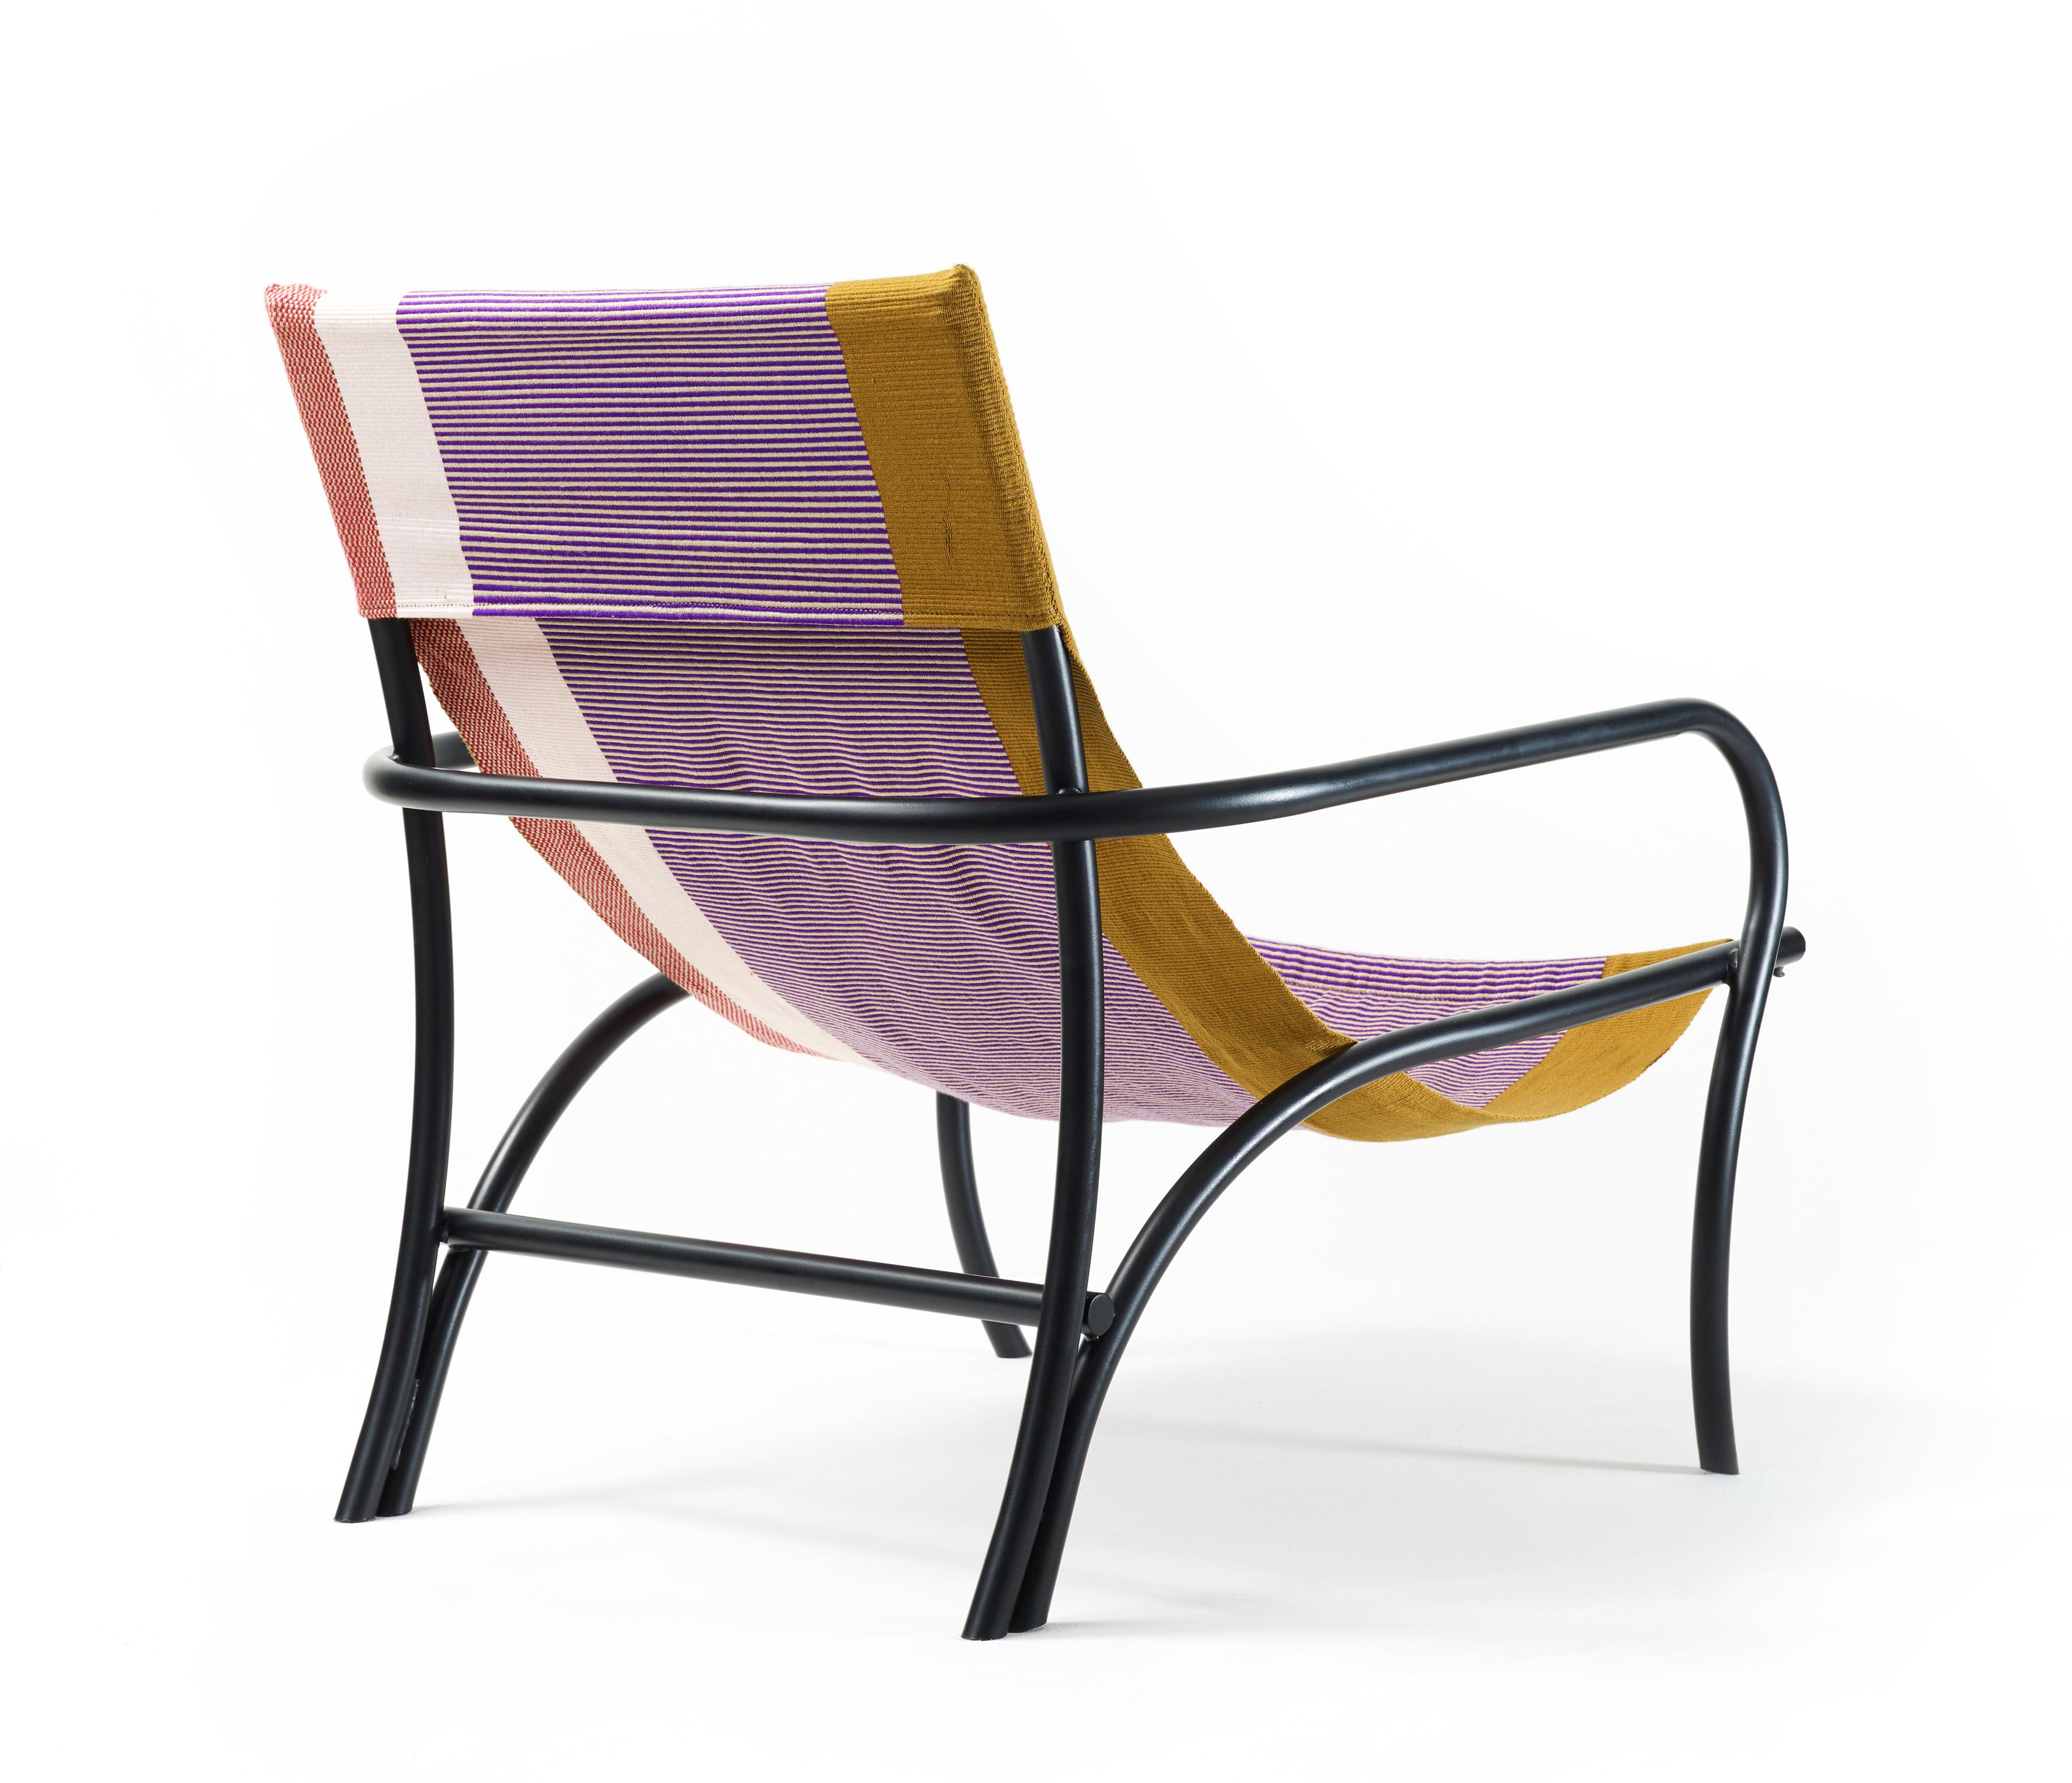 Set of 4 Dorado/Purple Maraca lounge chair by Sebastian Herkner.
Materials: Galvanized and powder-coated tubular steel. 100% cotton. 
Technique: hand-woven with 100% cotton yarns.
Dimensions: W 72.7 x D 86.7 x H 88.5 cm.
Available in colors: